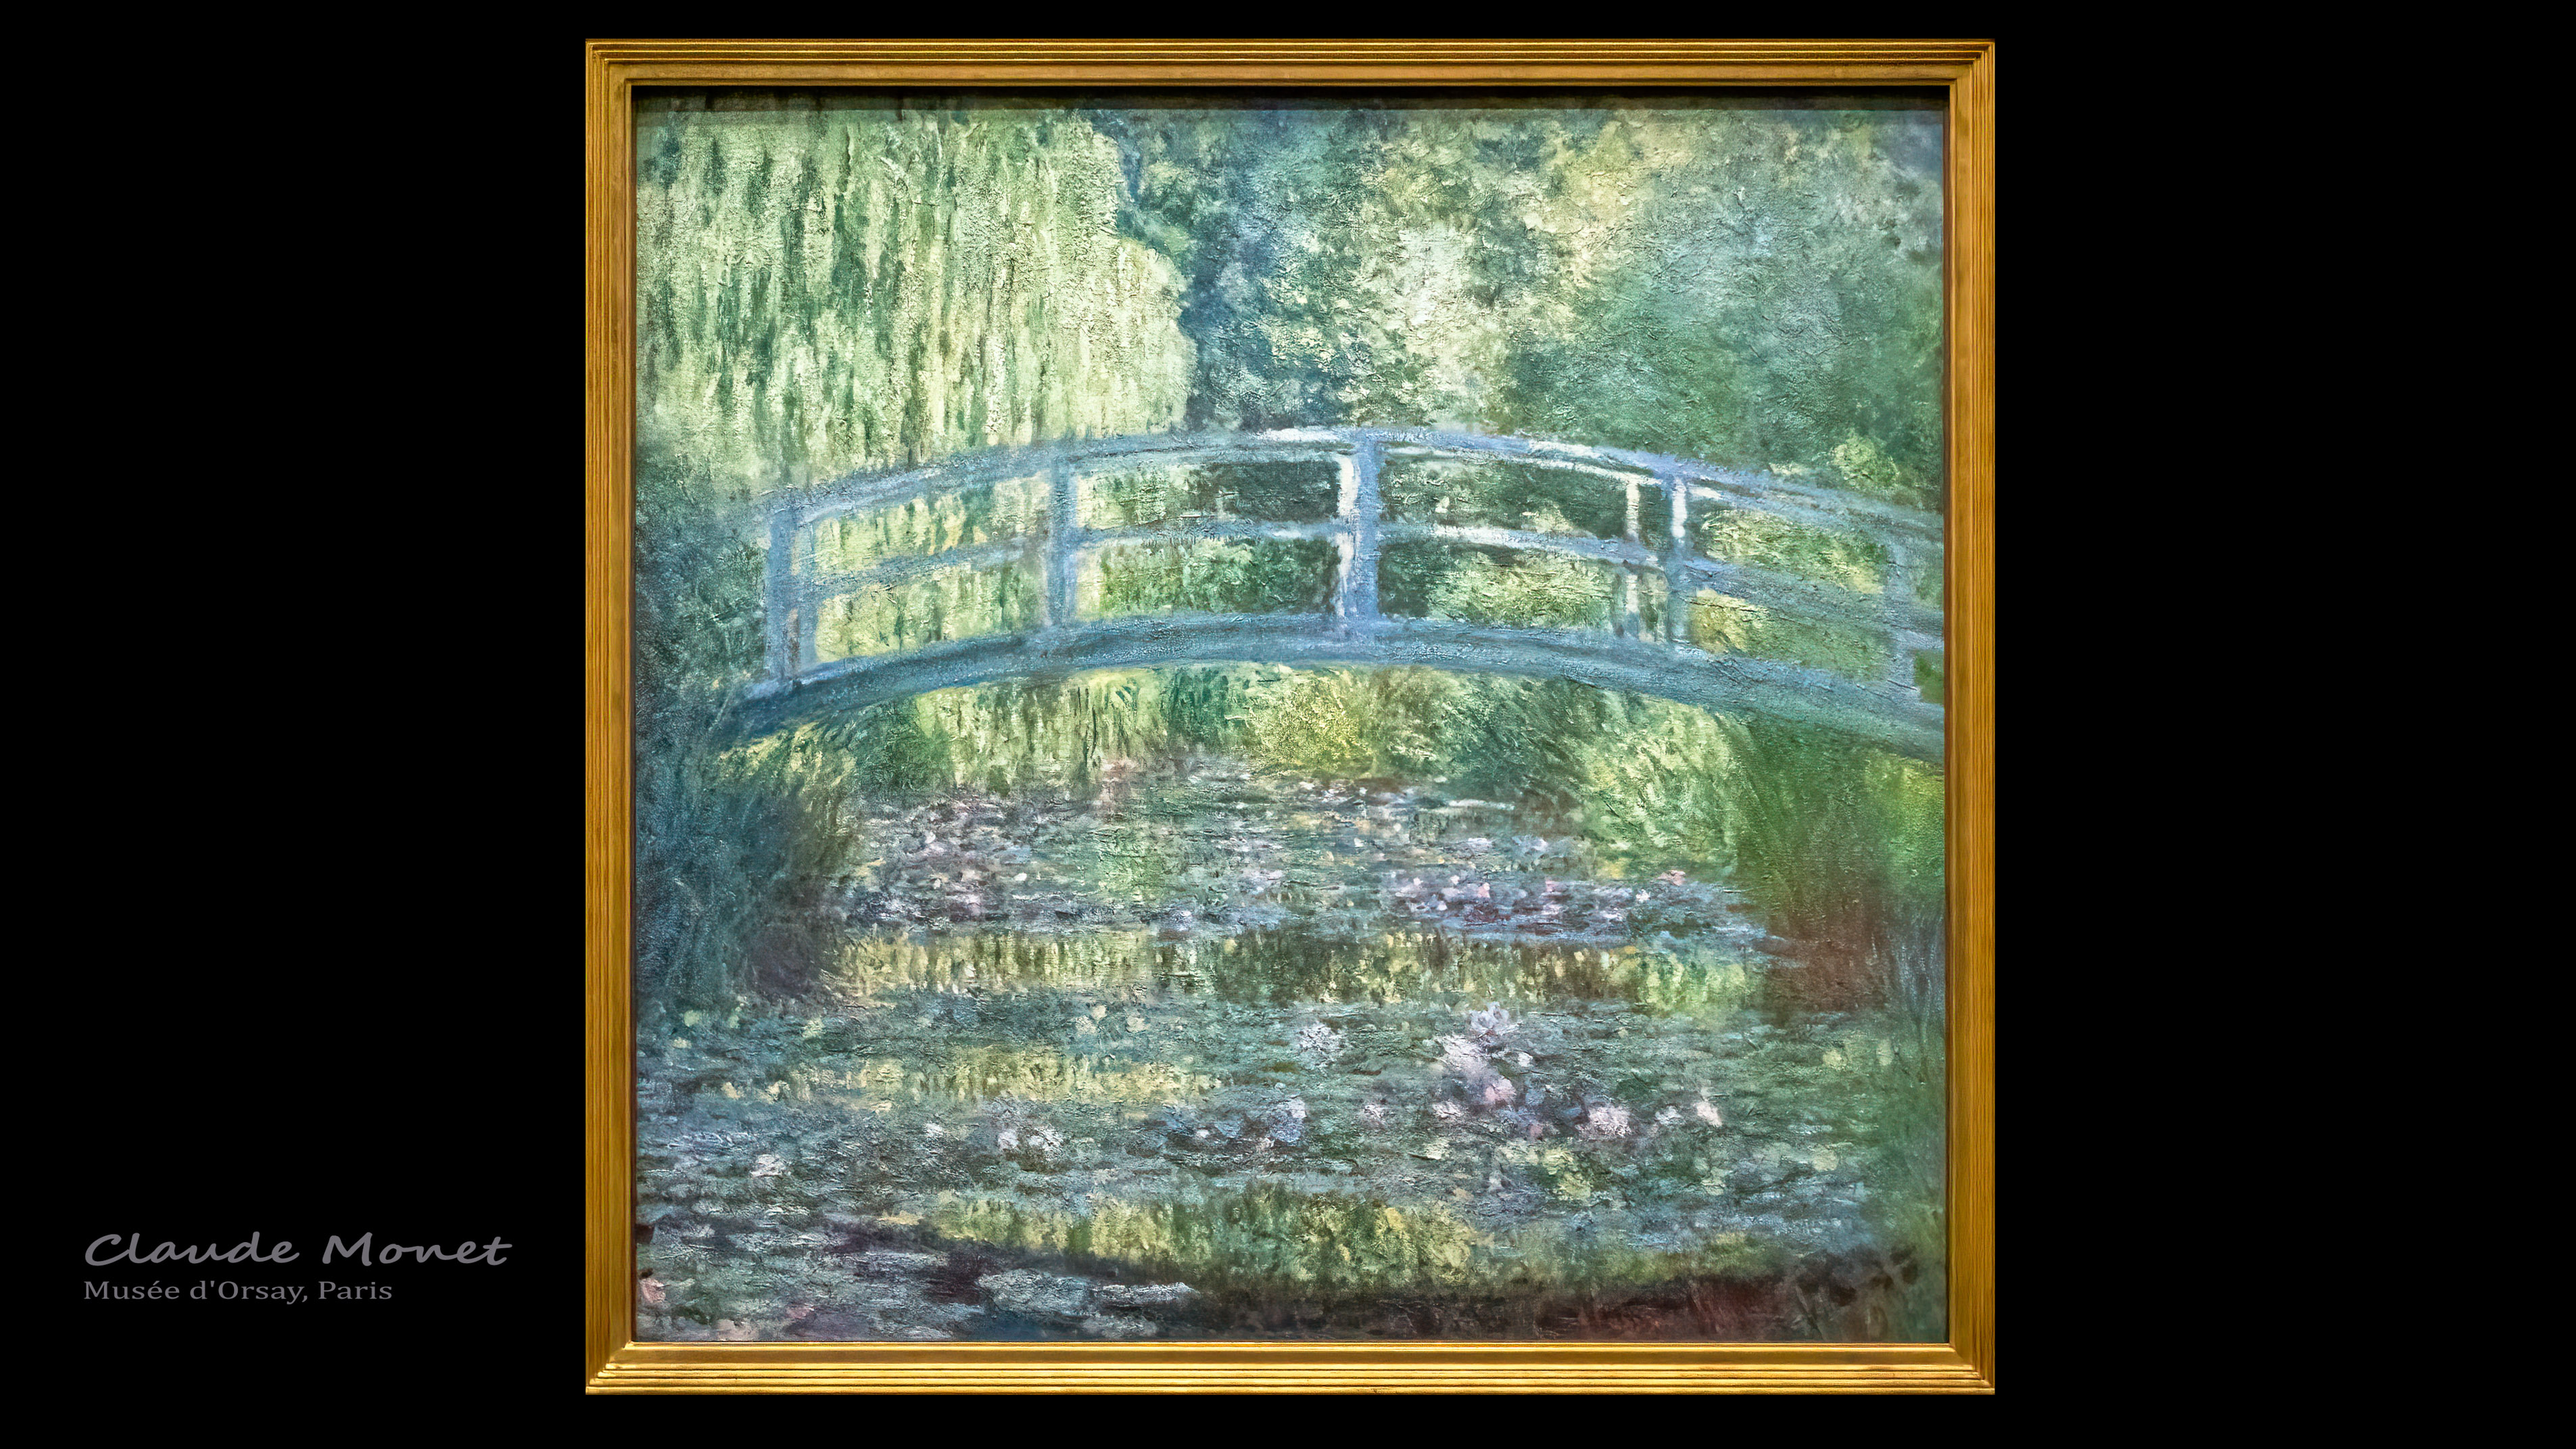 Immerse yourself in the exquisite and serene world of ‘Water Lilies and Japanese Bridge’ Claude Monet painting wallpaper, featuring the beautiful and tranquil view of the pond and the bridge in his garden at Giverny.